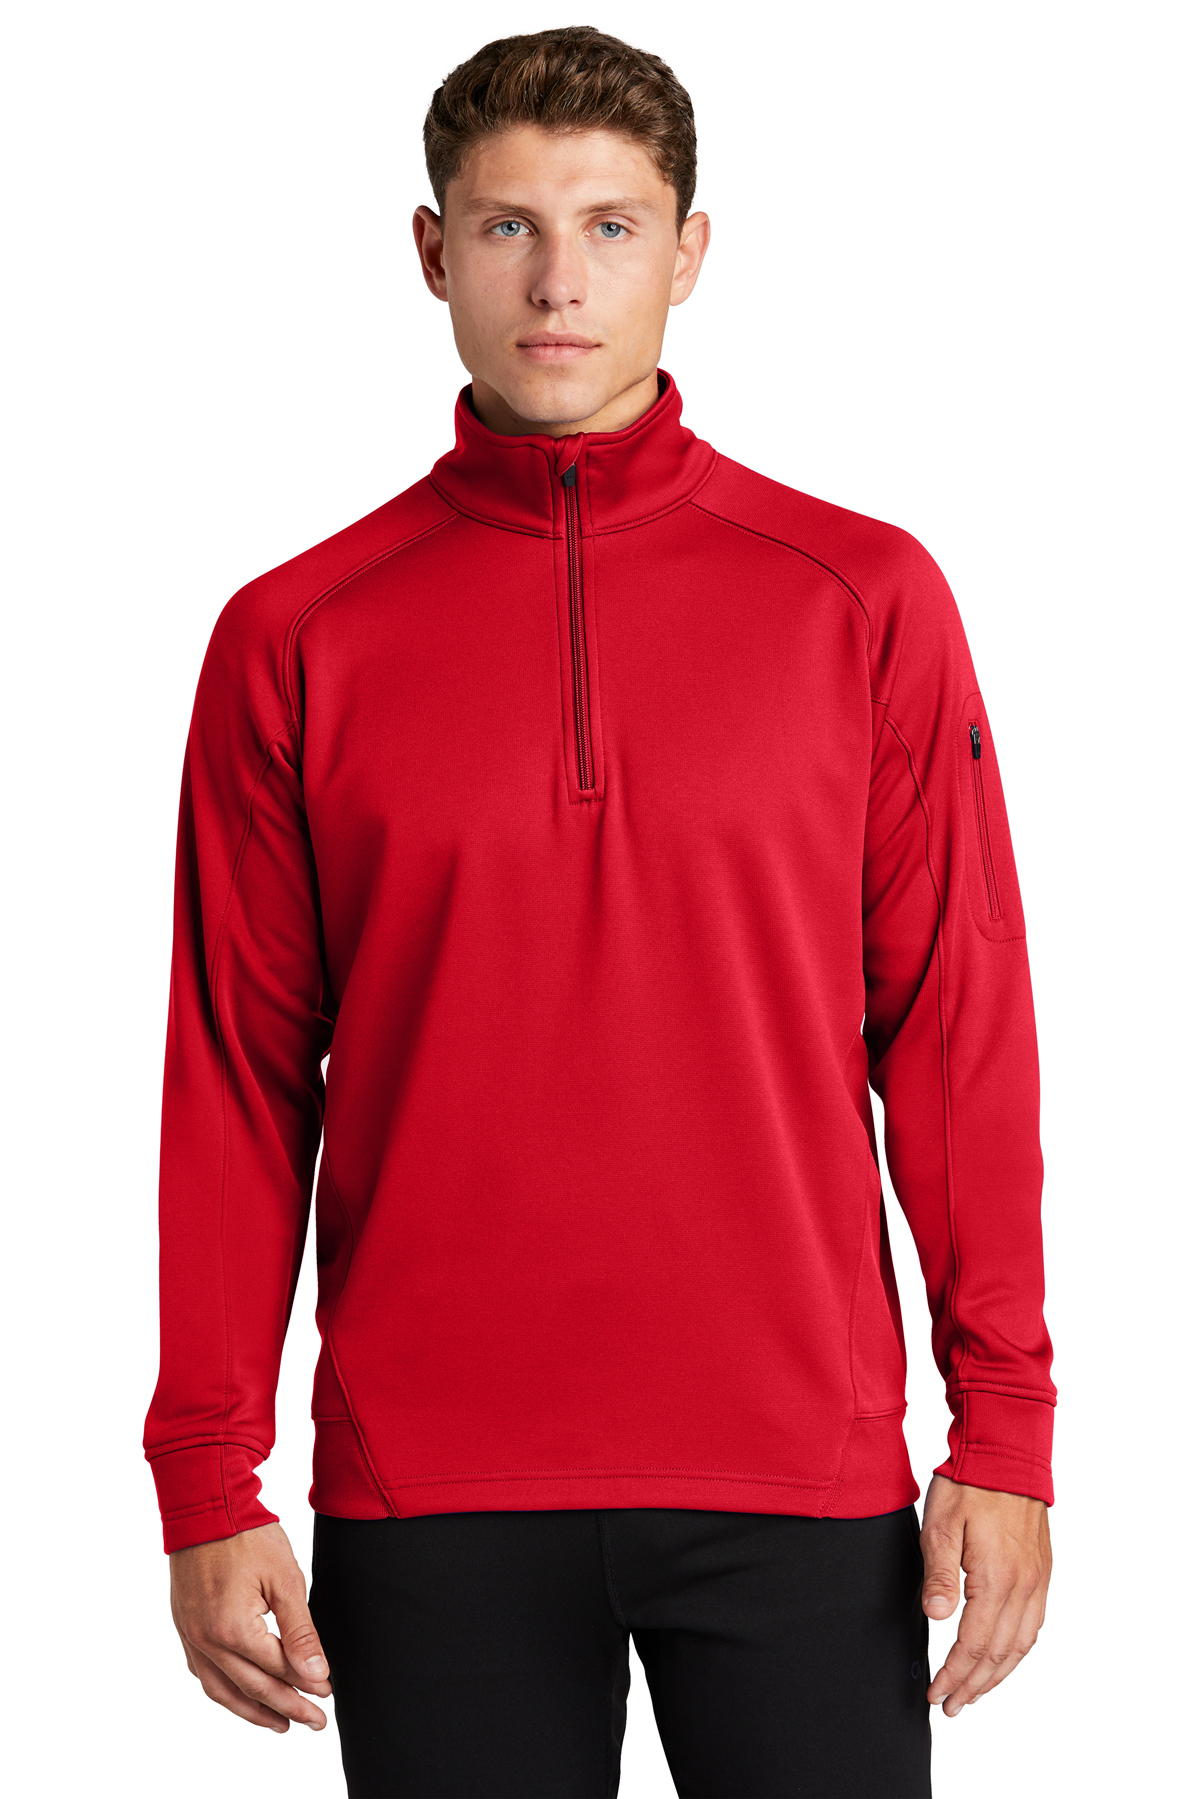 Color Options Umbro Youth Boys Woven 1/4 Zip Pullover Perfomance Hooded Jacket 